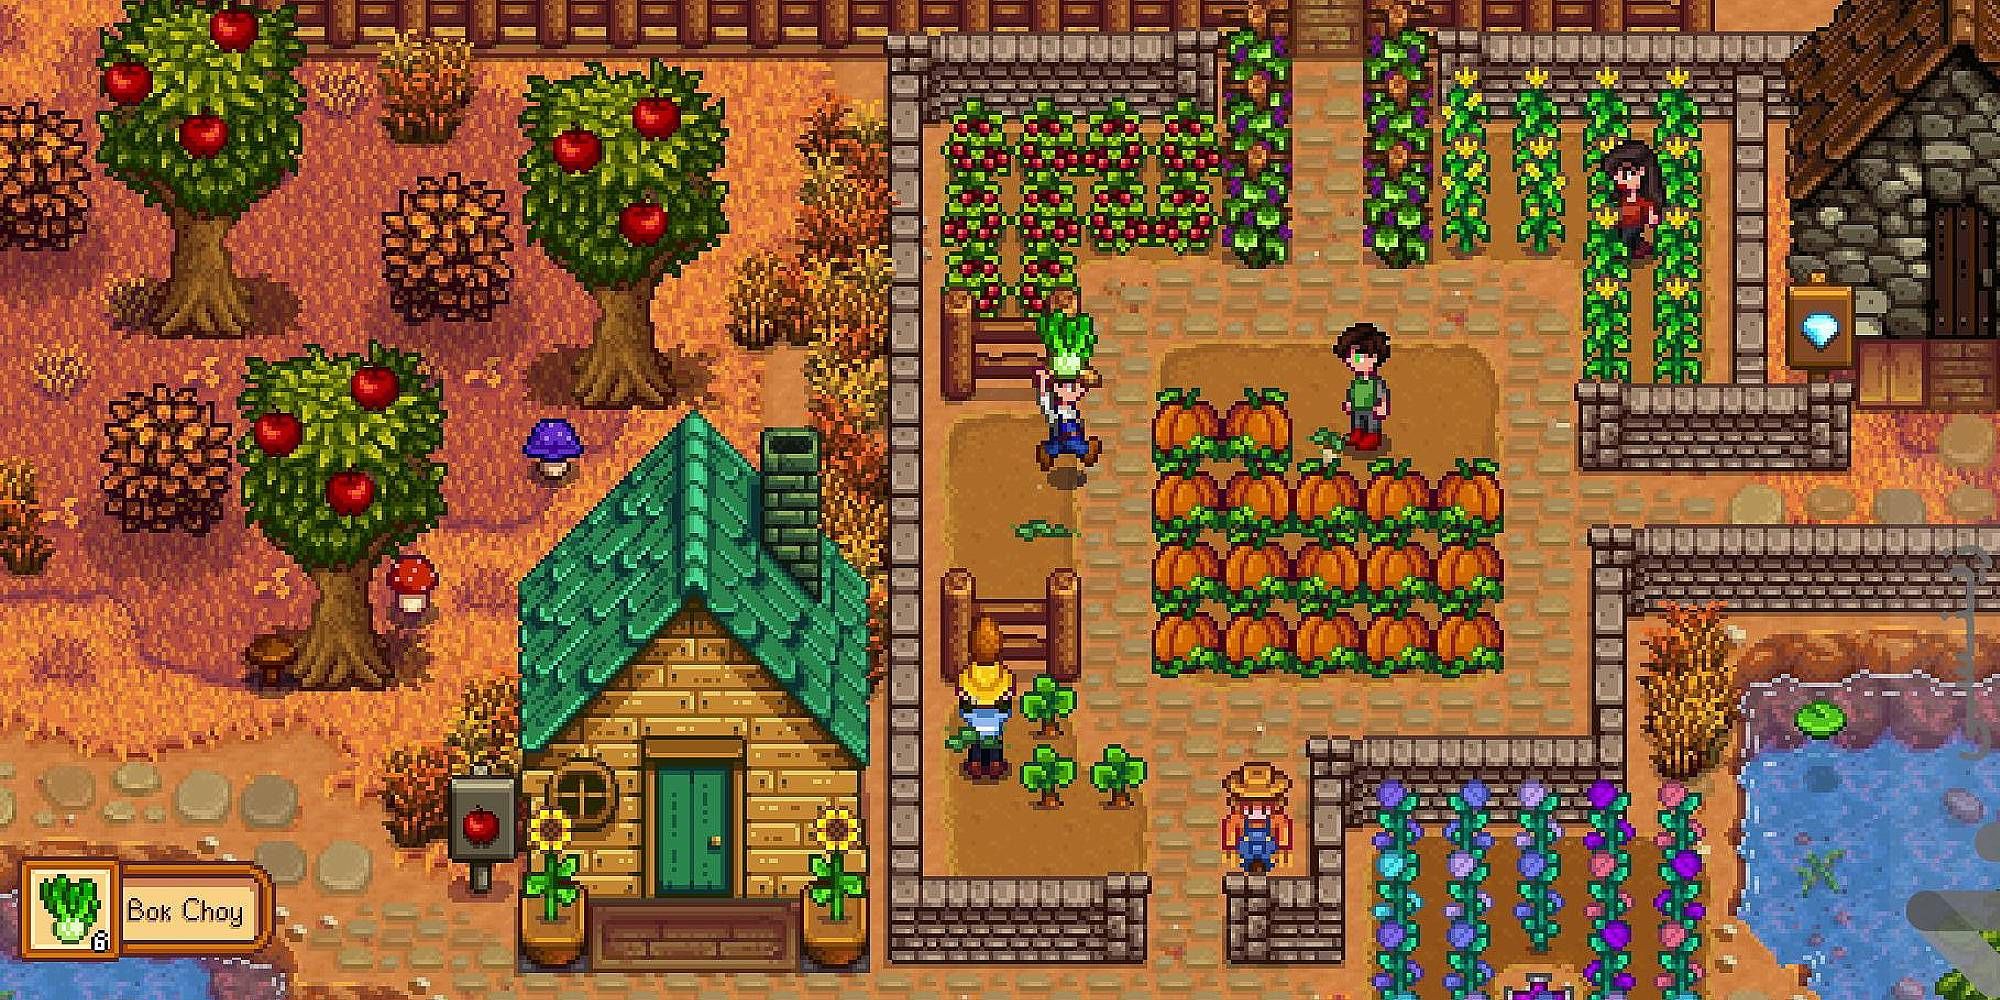 Numerous players on a farm in Stardew Valley